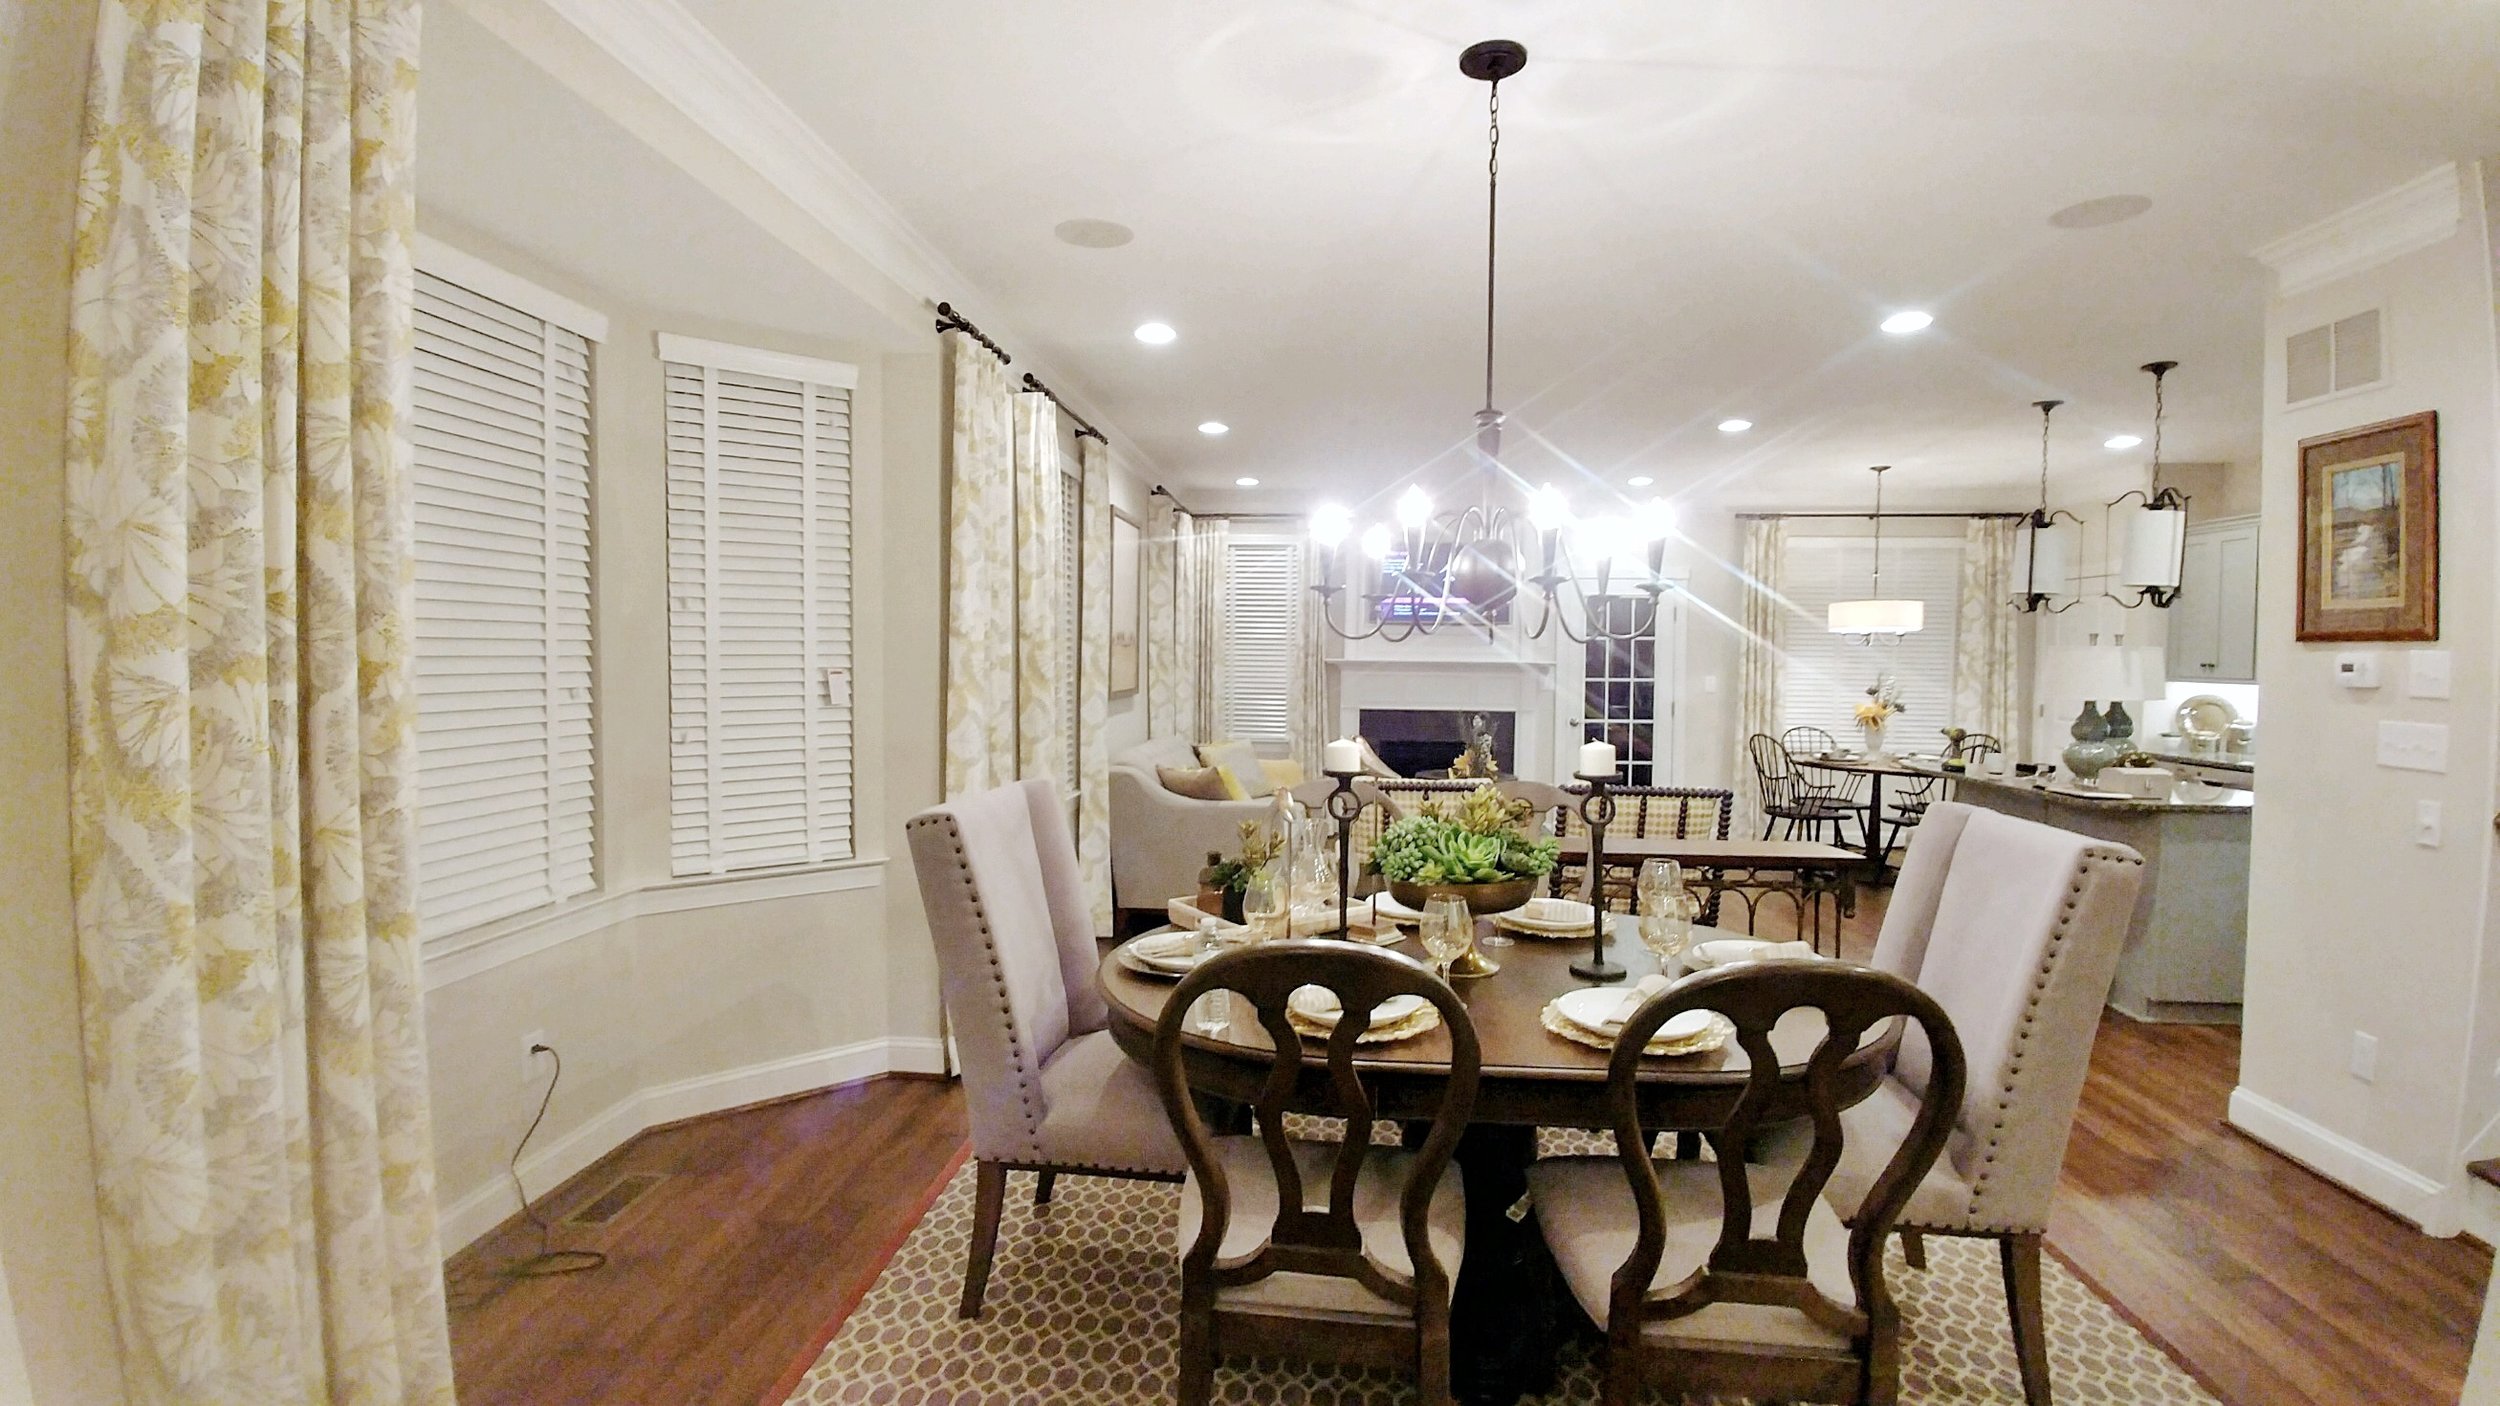 Custom white window blinds throughout dining room and kitchen by 3rdGenBlinds